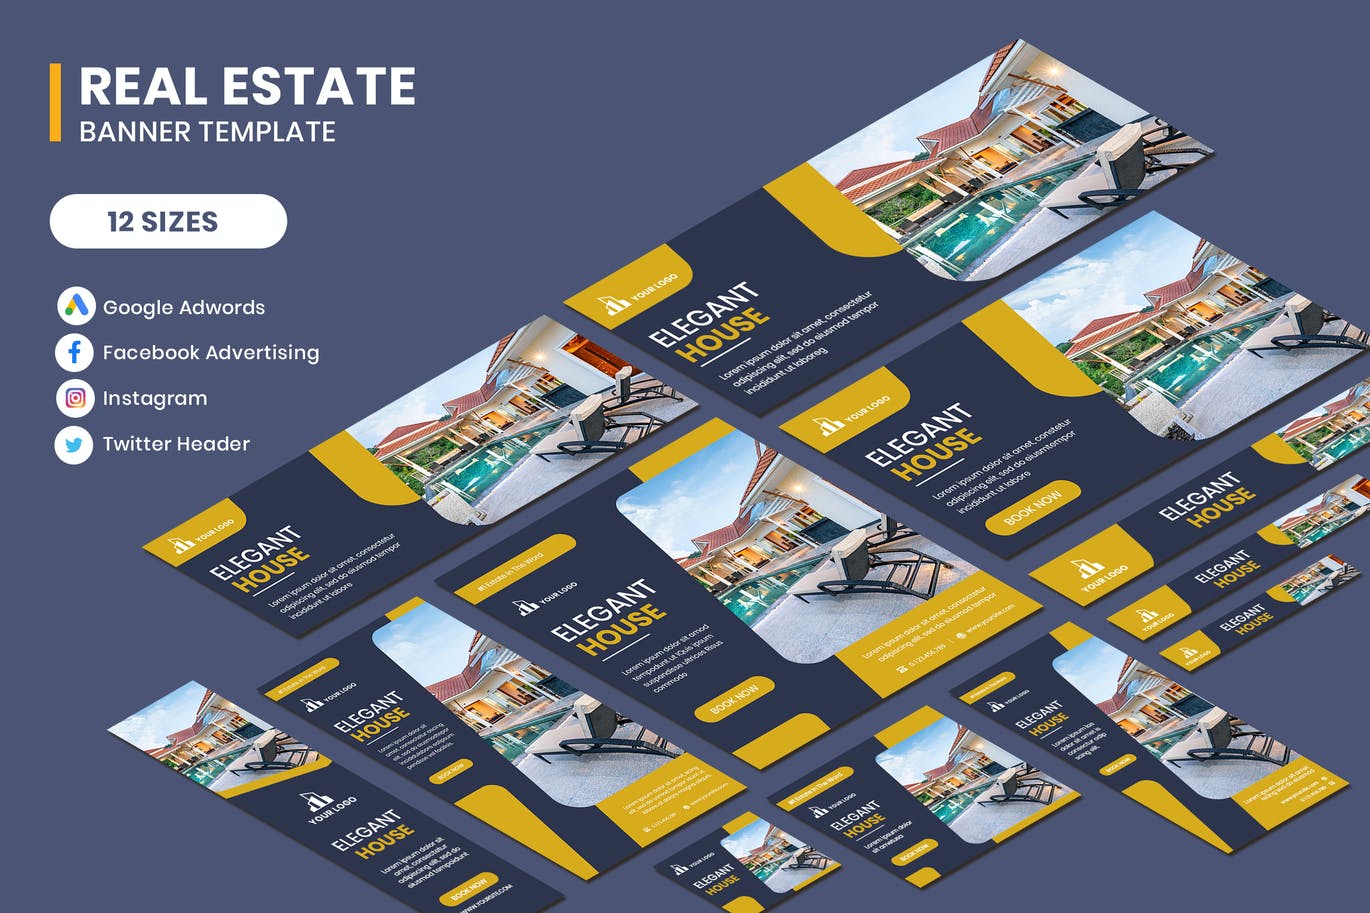 Real Estate Banners